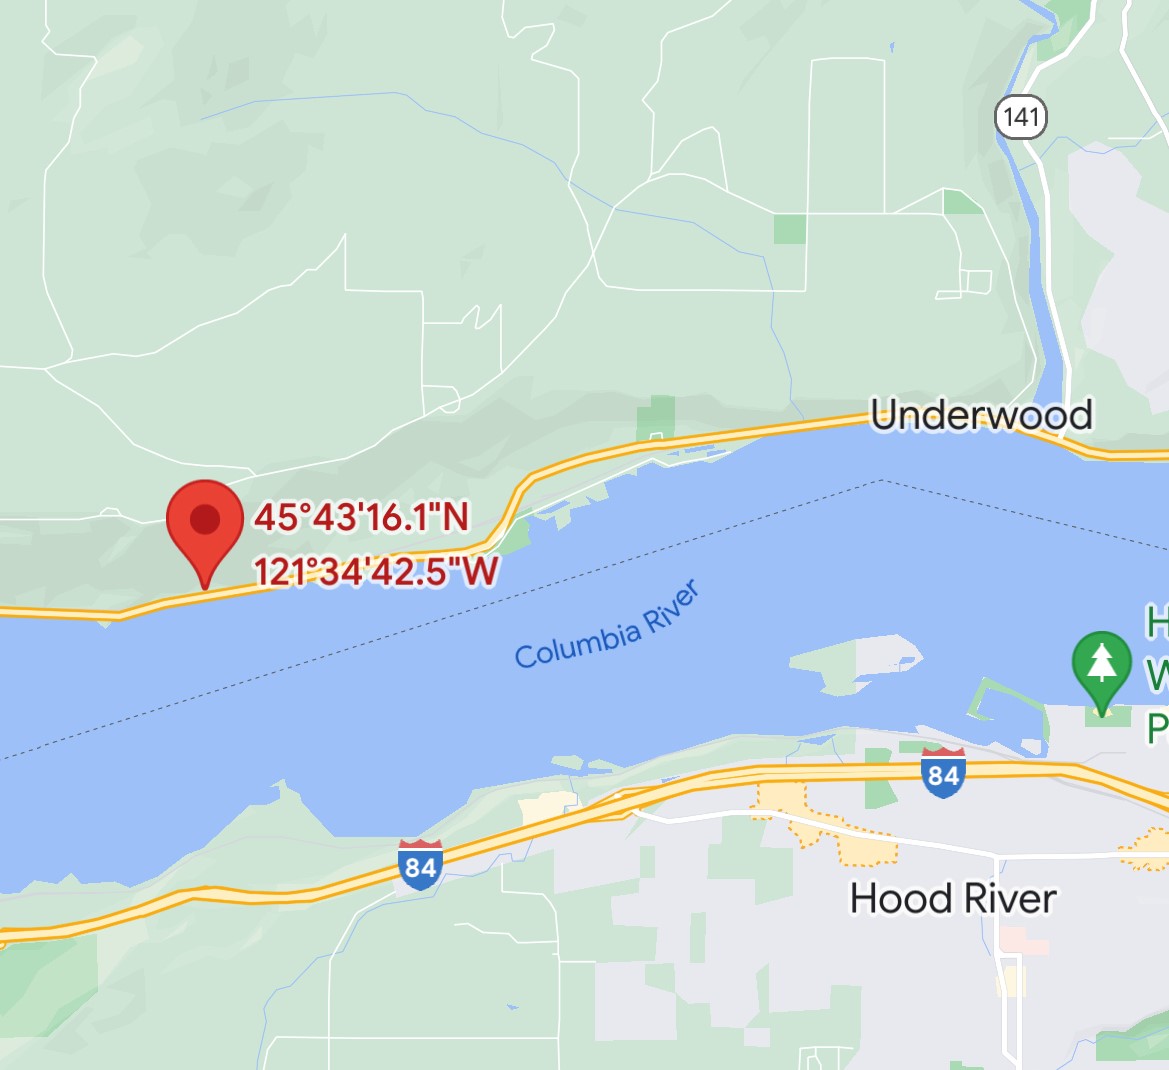 #WaWILDFIRE NEW #Tunnel5Fire near Underwood, WA in Skamania County is at 25 acres and moving rapidly. High threat potential, currently 100 structures threatened. More information as it comes available.